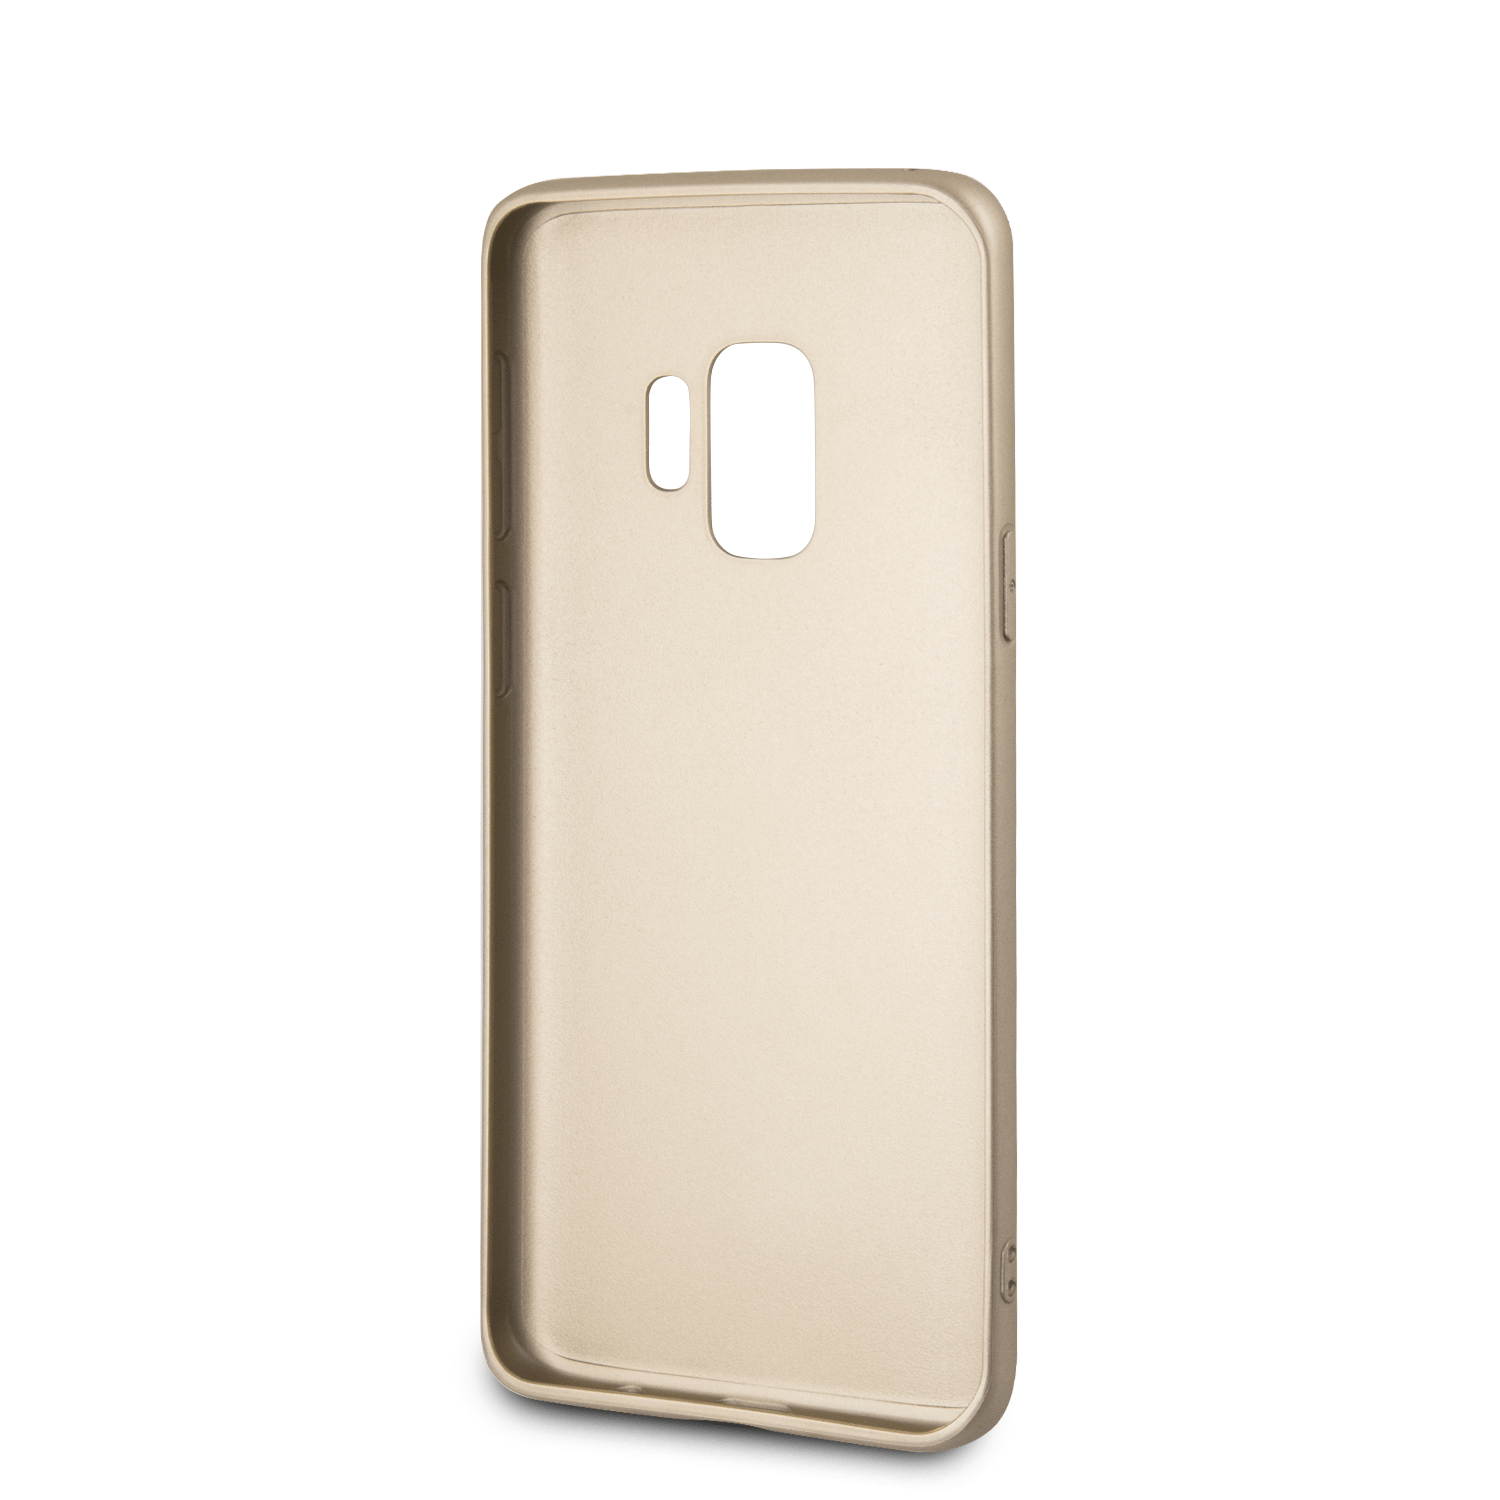 Protect your phone with style and elegance with the GUESS cover, offering full protection from scratches and abrasions.